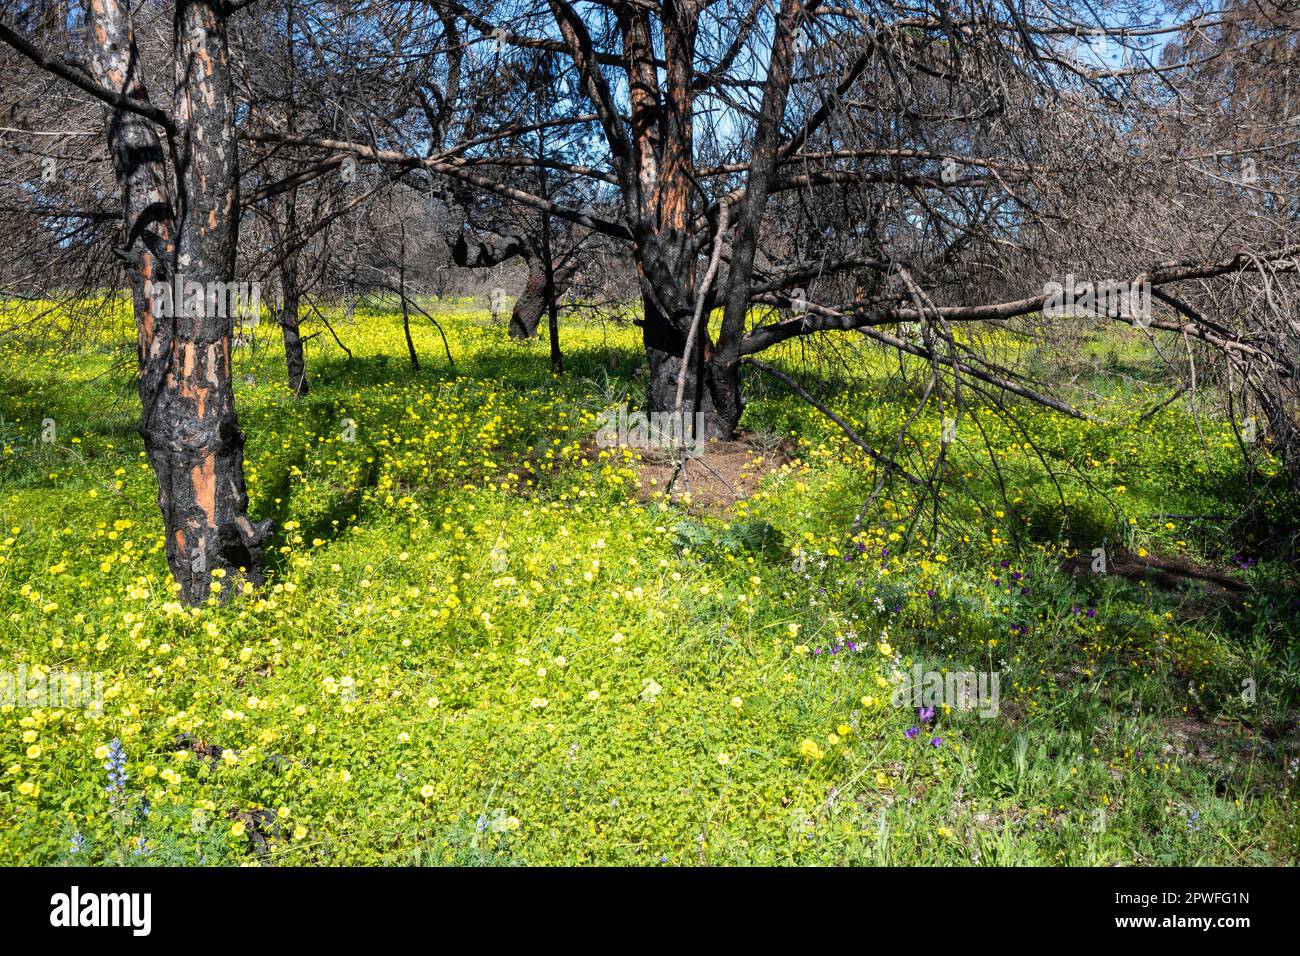 Regrowth of flowers after forest fire. Stock Photo